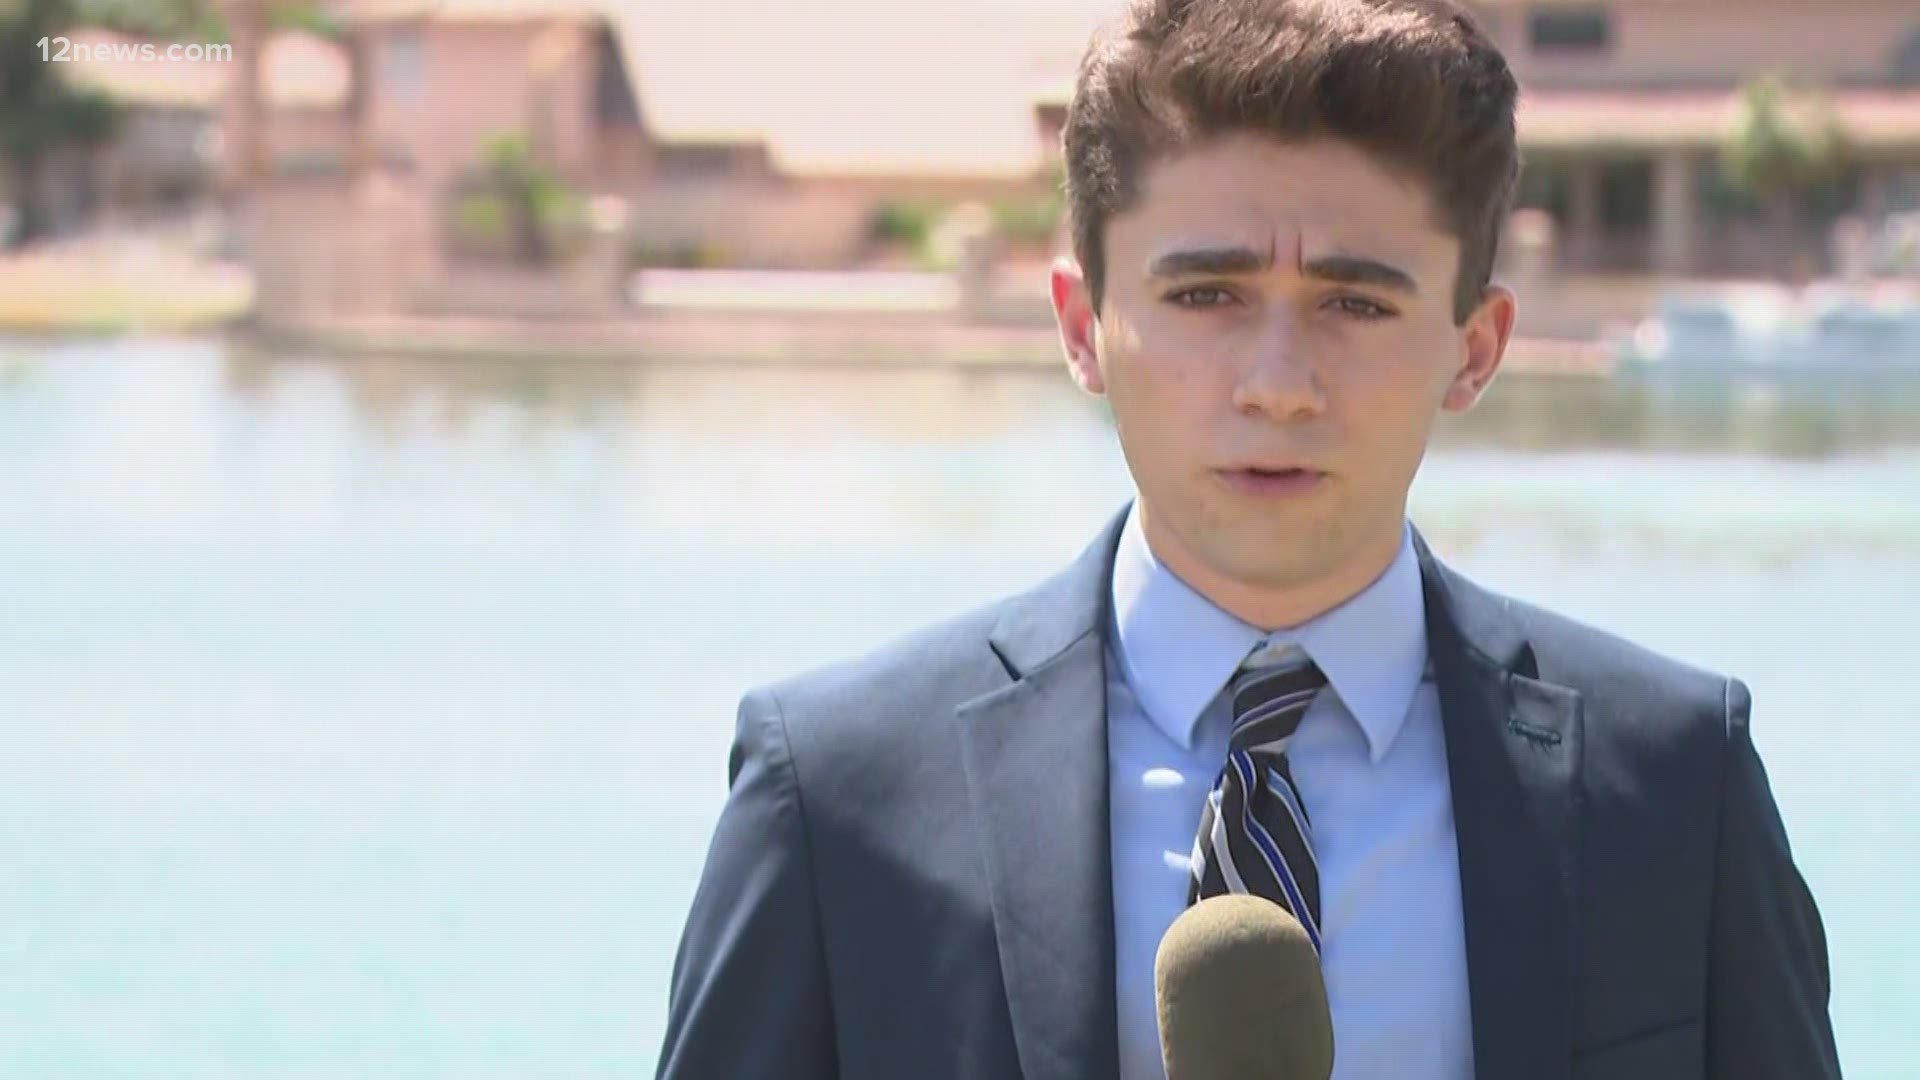 Phoenix high school senior who is aspiring to go into business marketing when he graduates became the brains behind prom for students across the state.